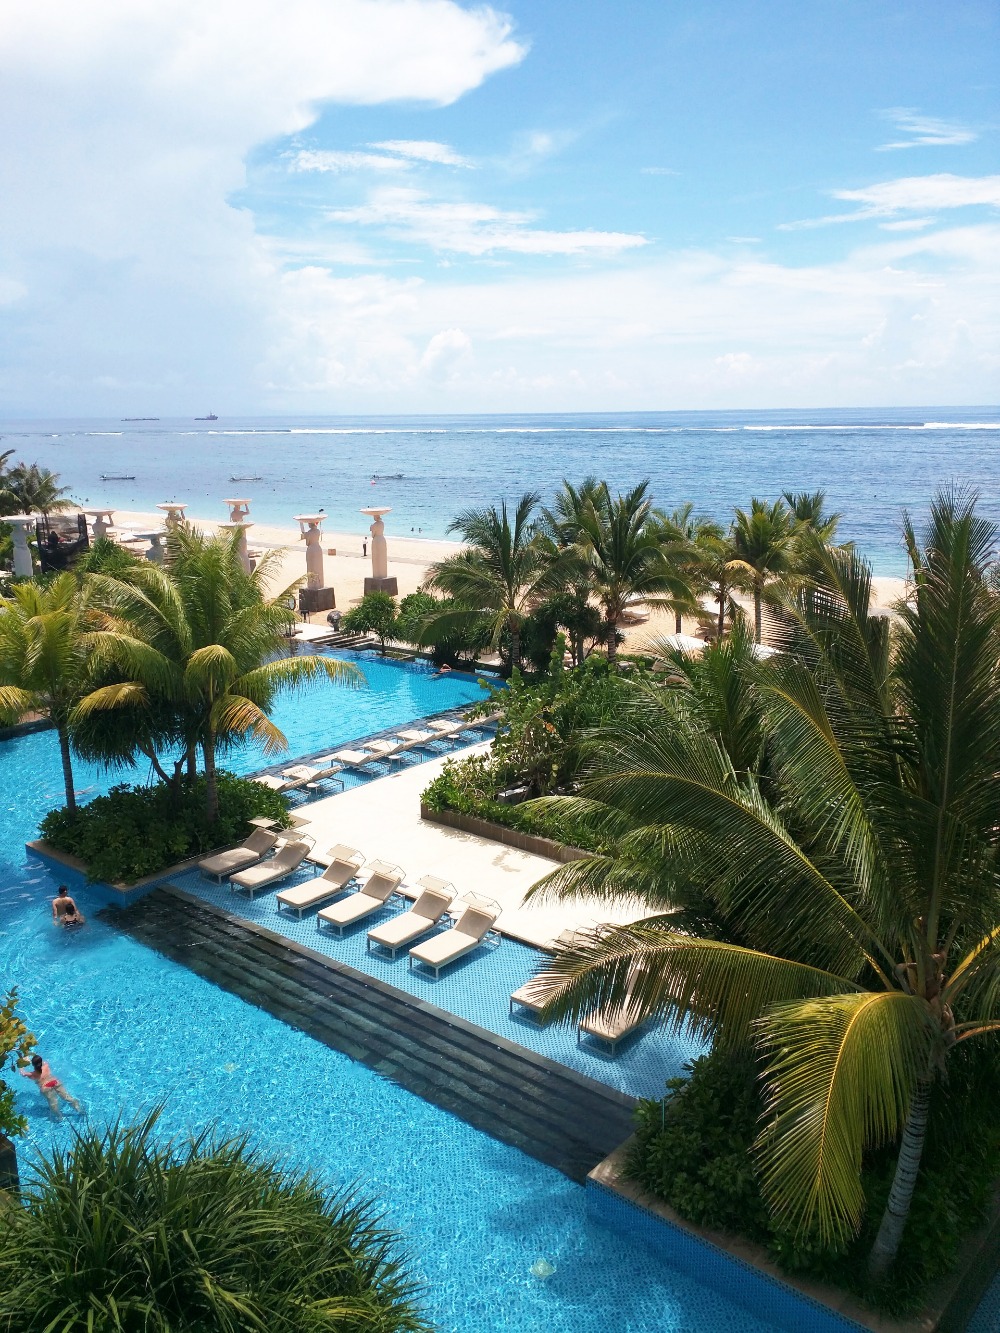 tie-the-knot-in-paradise-at-the-mulia